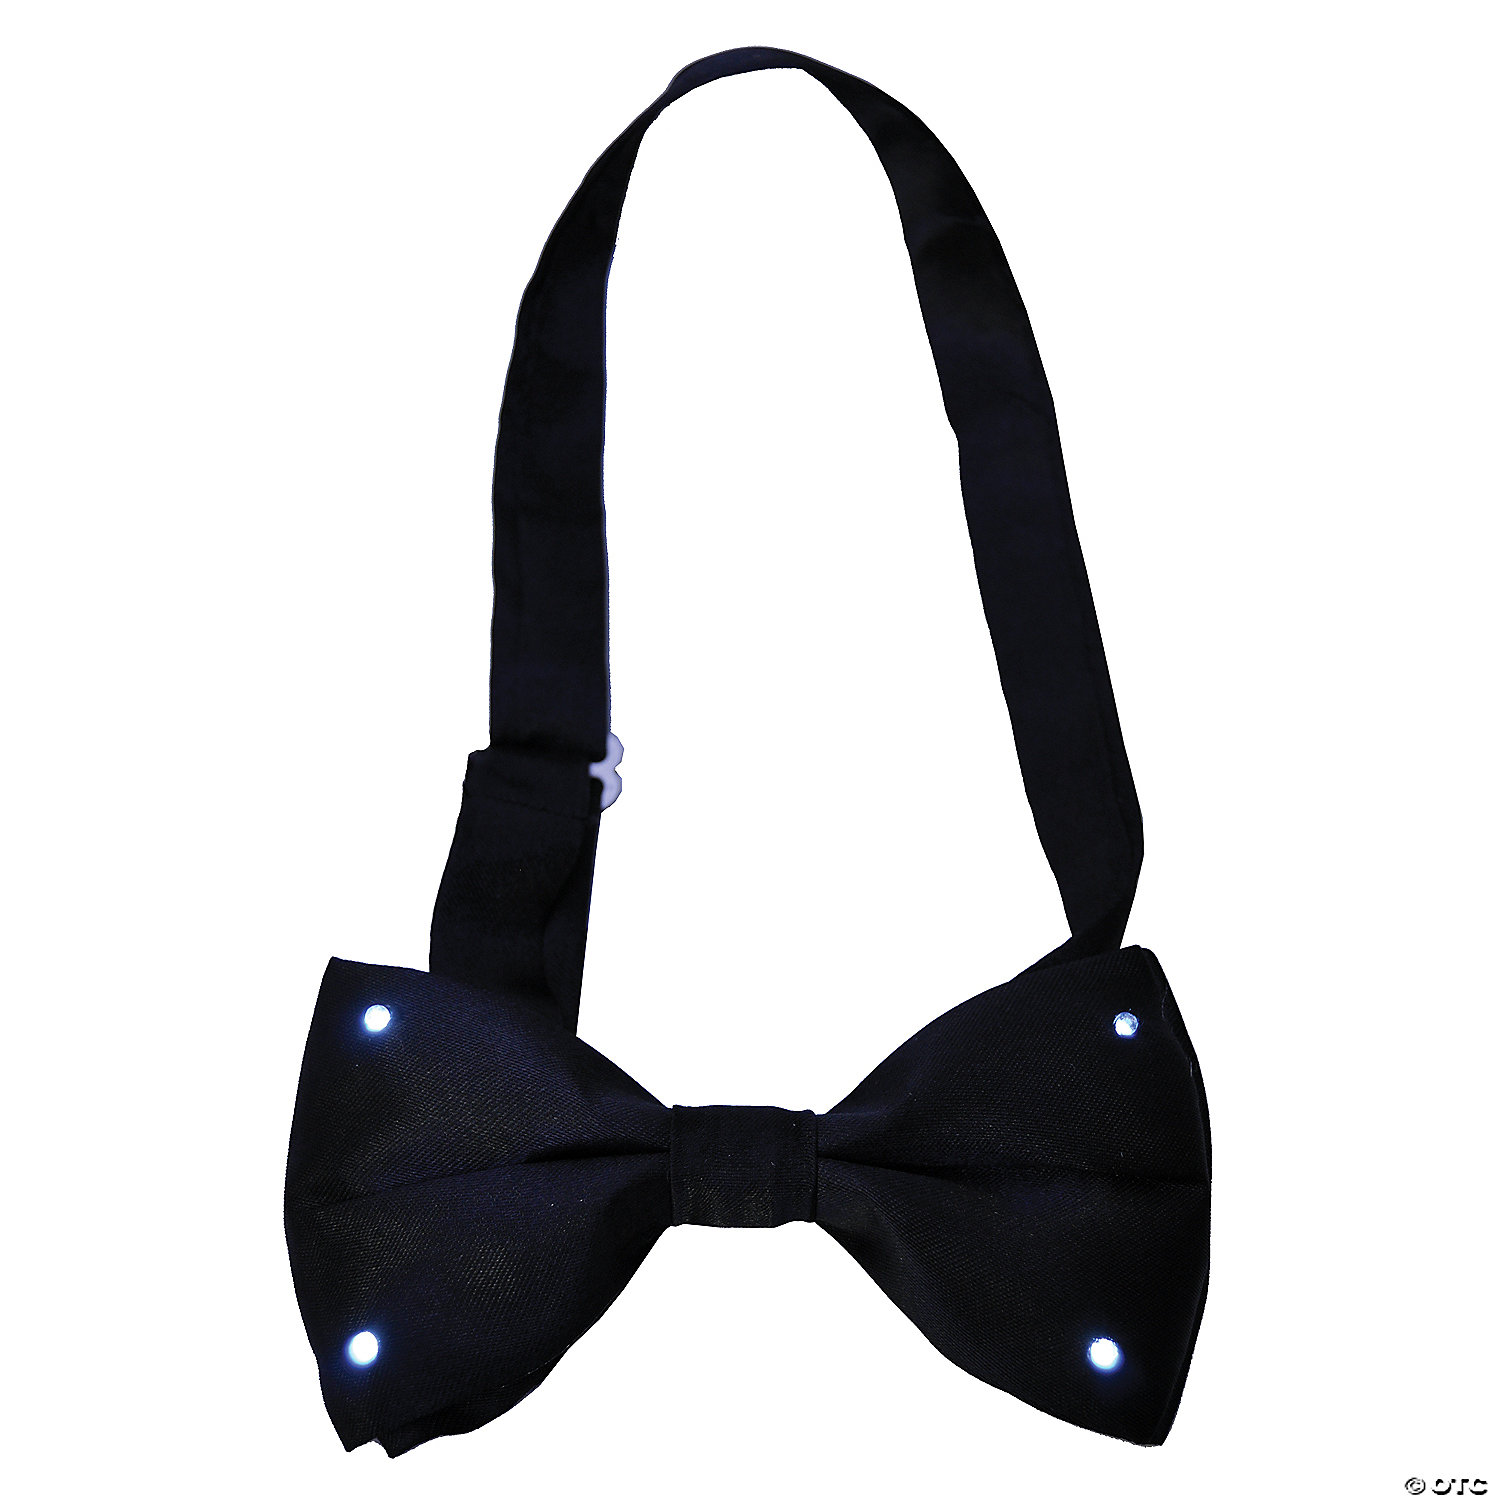 LIGHT UP BOW TIE BLACK - NEW YEAR'S